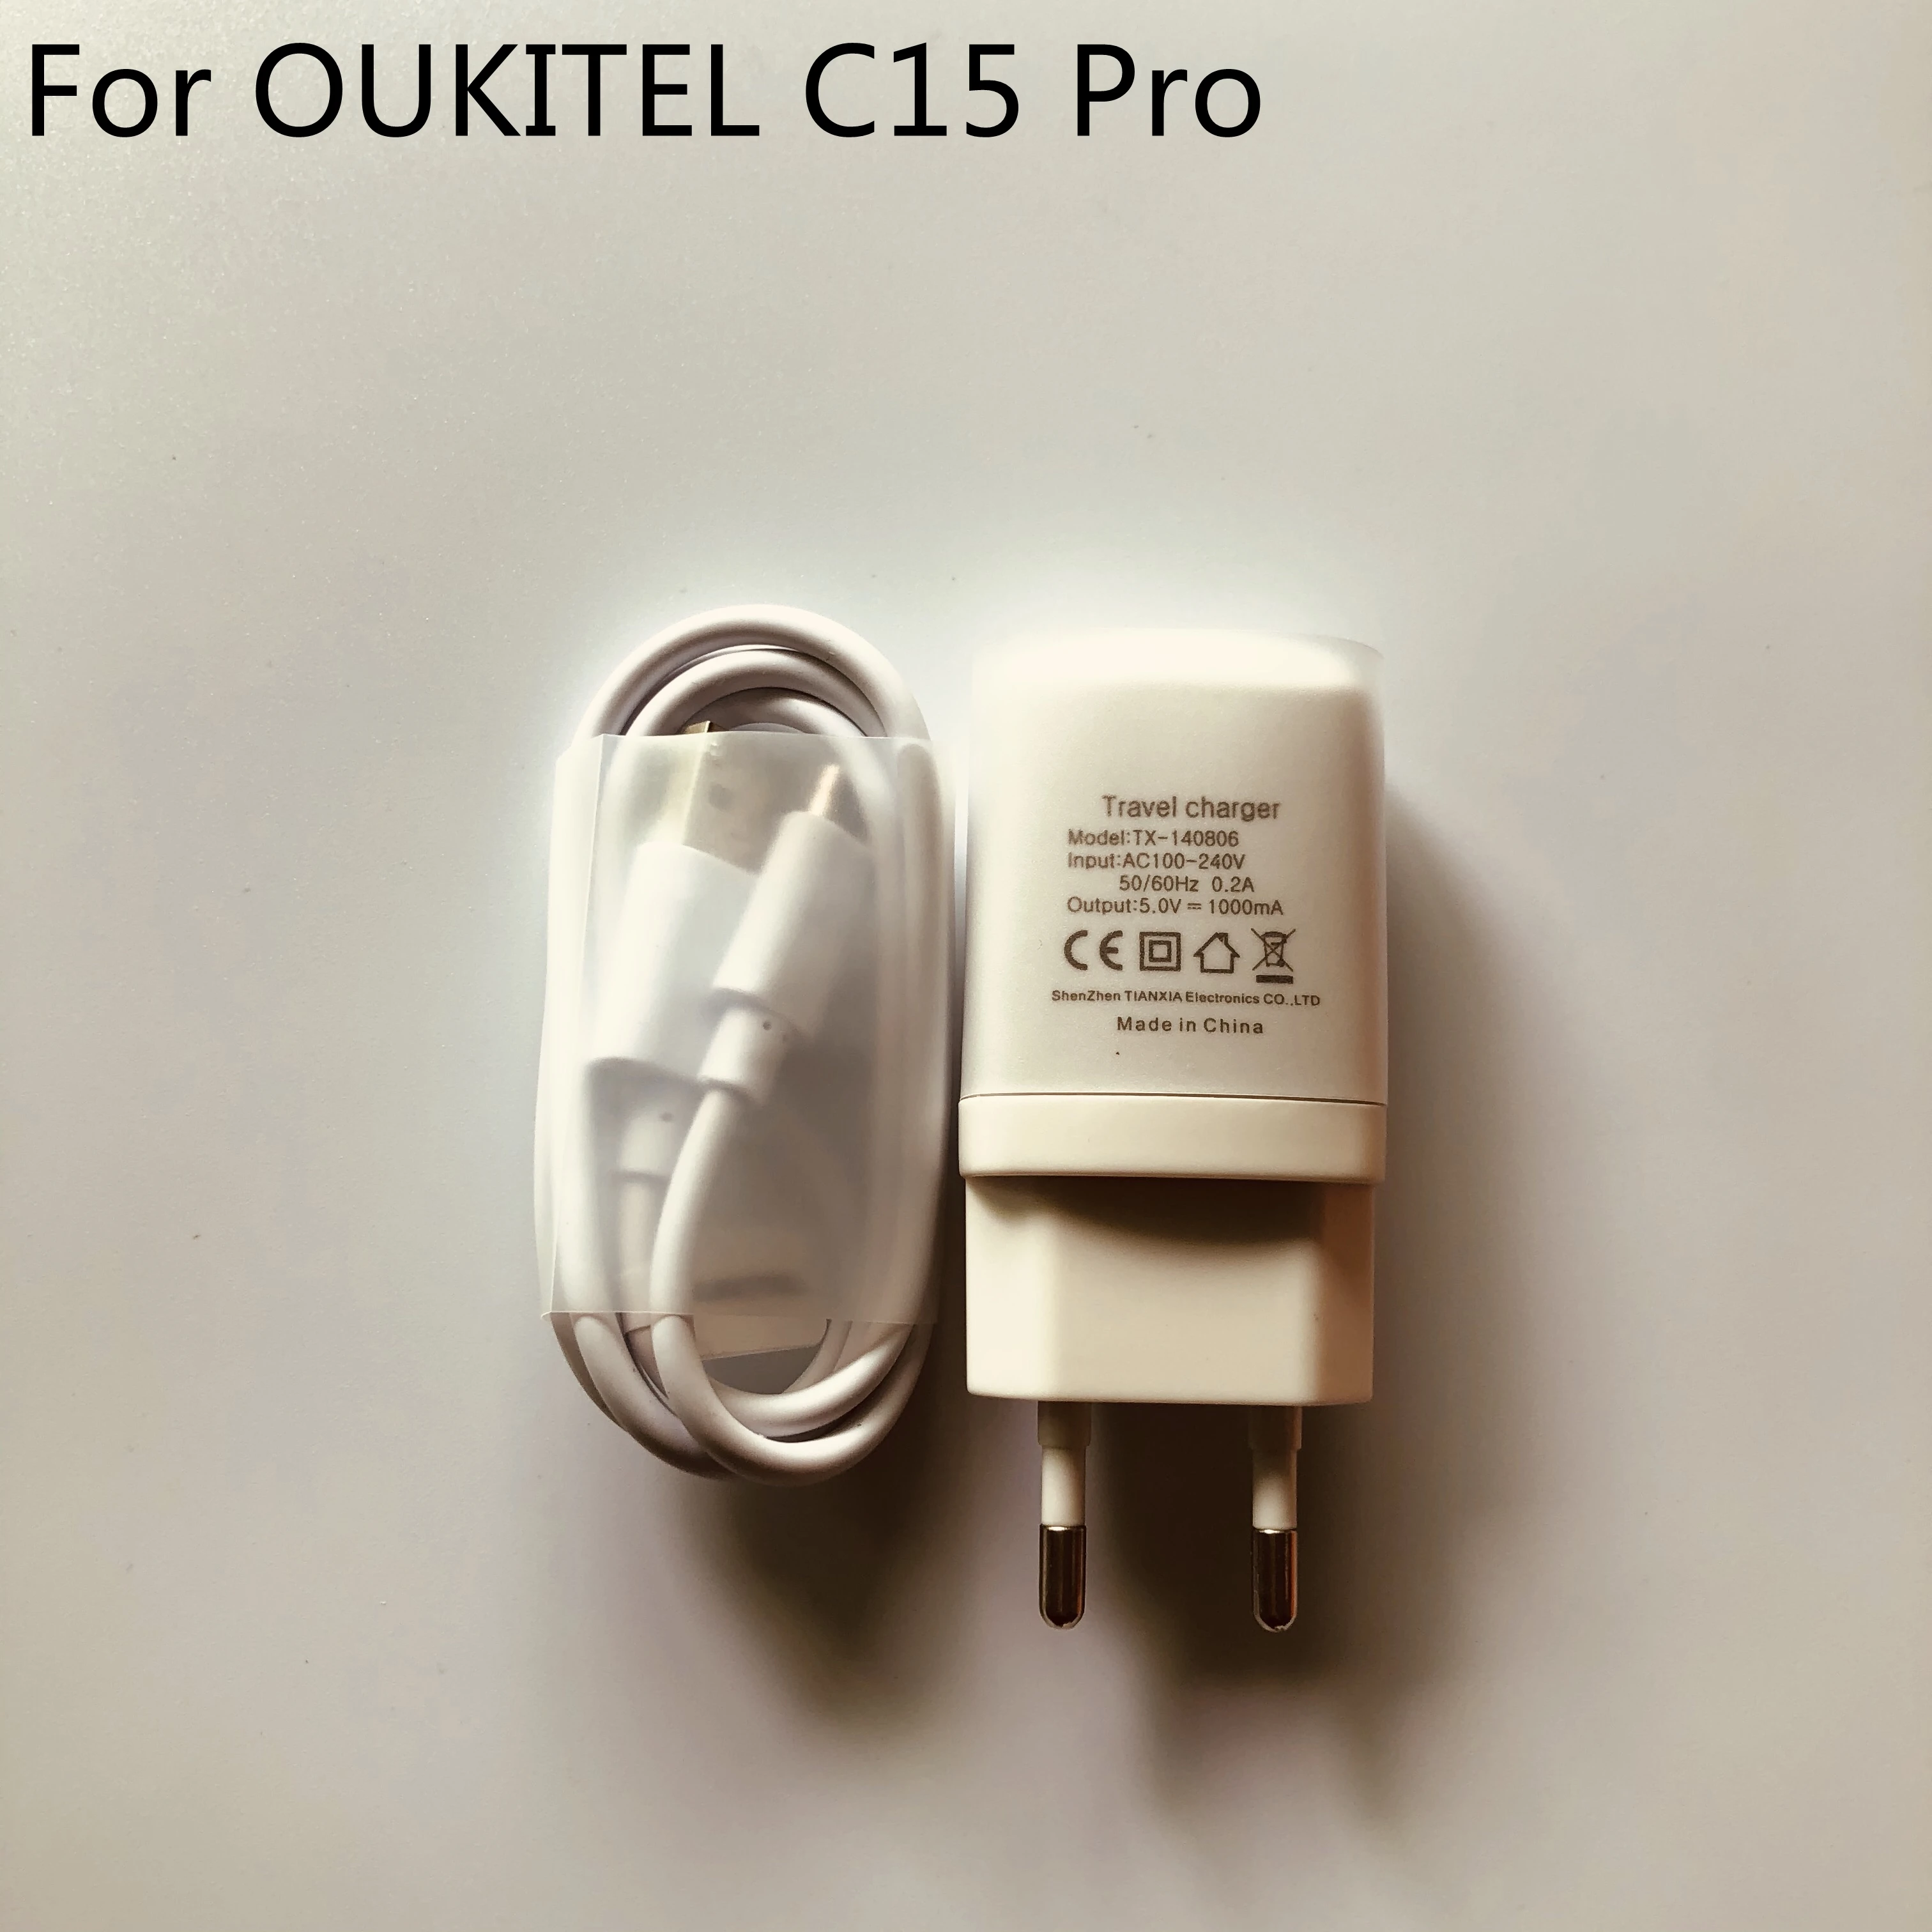 

OUKITEL C15 Pro New Travel Charger + Type-C Cable For OUKITEL C15 Pro MT6761 Quad Core 6.088'' 1280*600 Smartphone